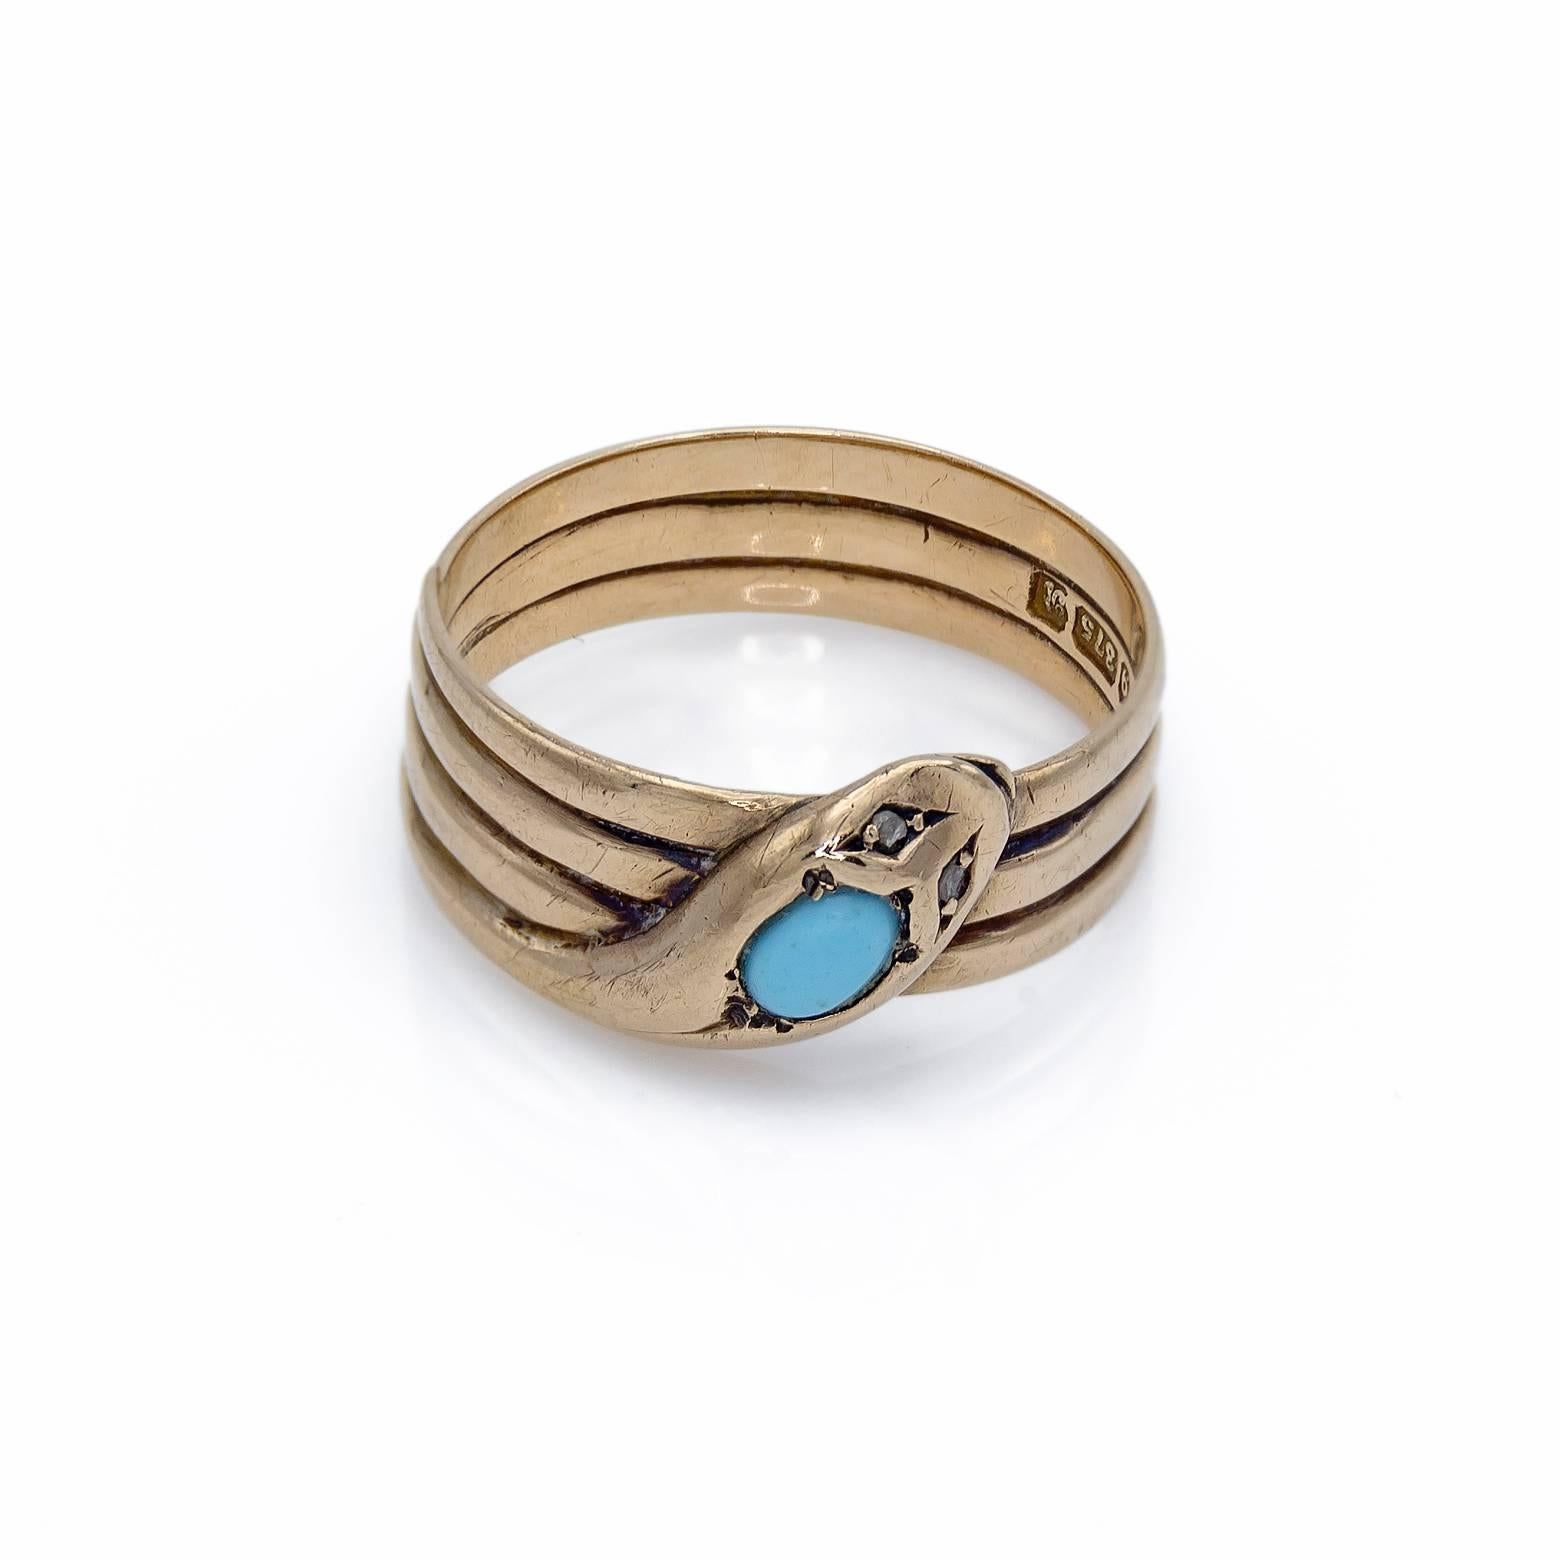 Snake rings are all the rage! This snake is rose 10k gold with a turquoise and diamond eyes head. The design was ahead of it's time at the turn of the century but has endured the test of time! The ring is a size 8 1/2 and can be sized to fit your